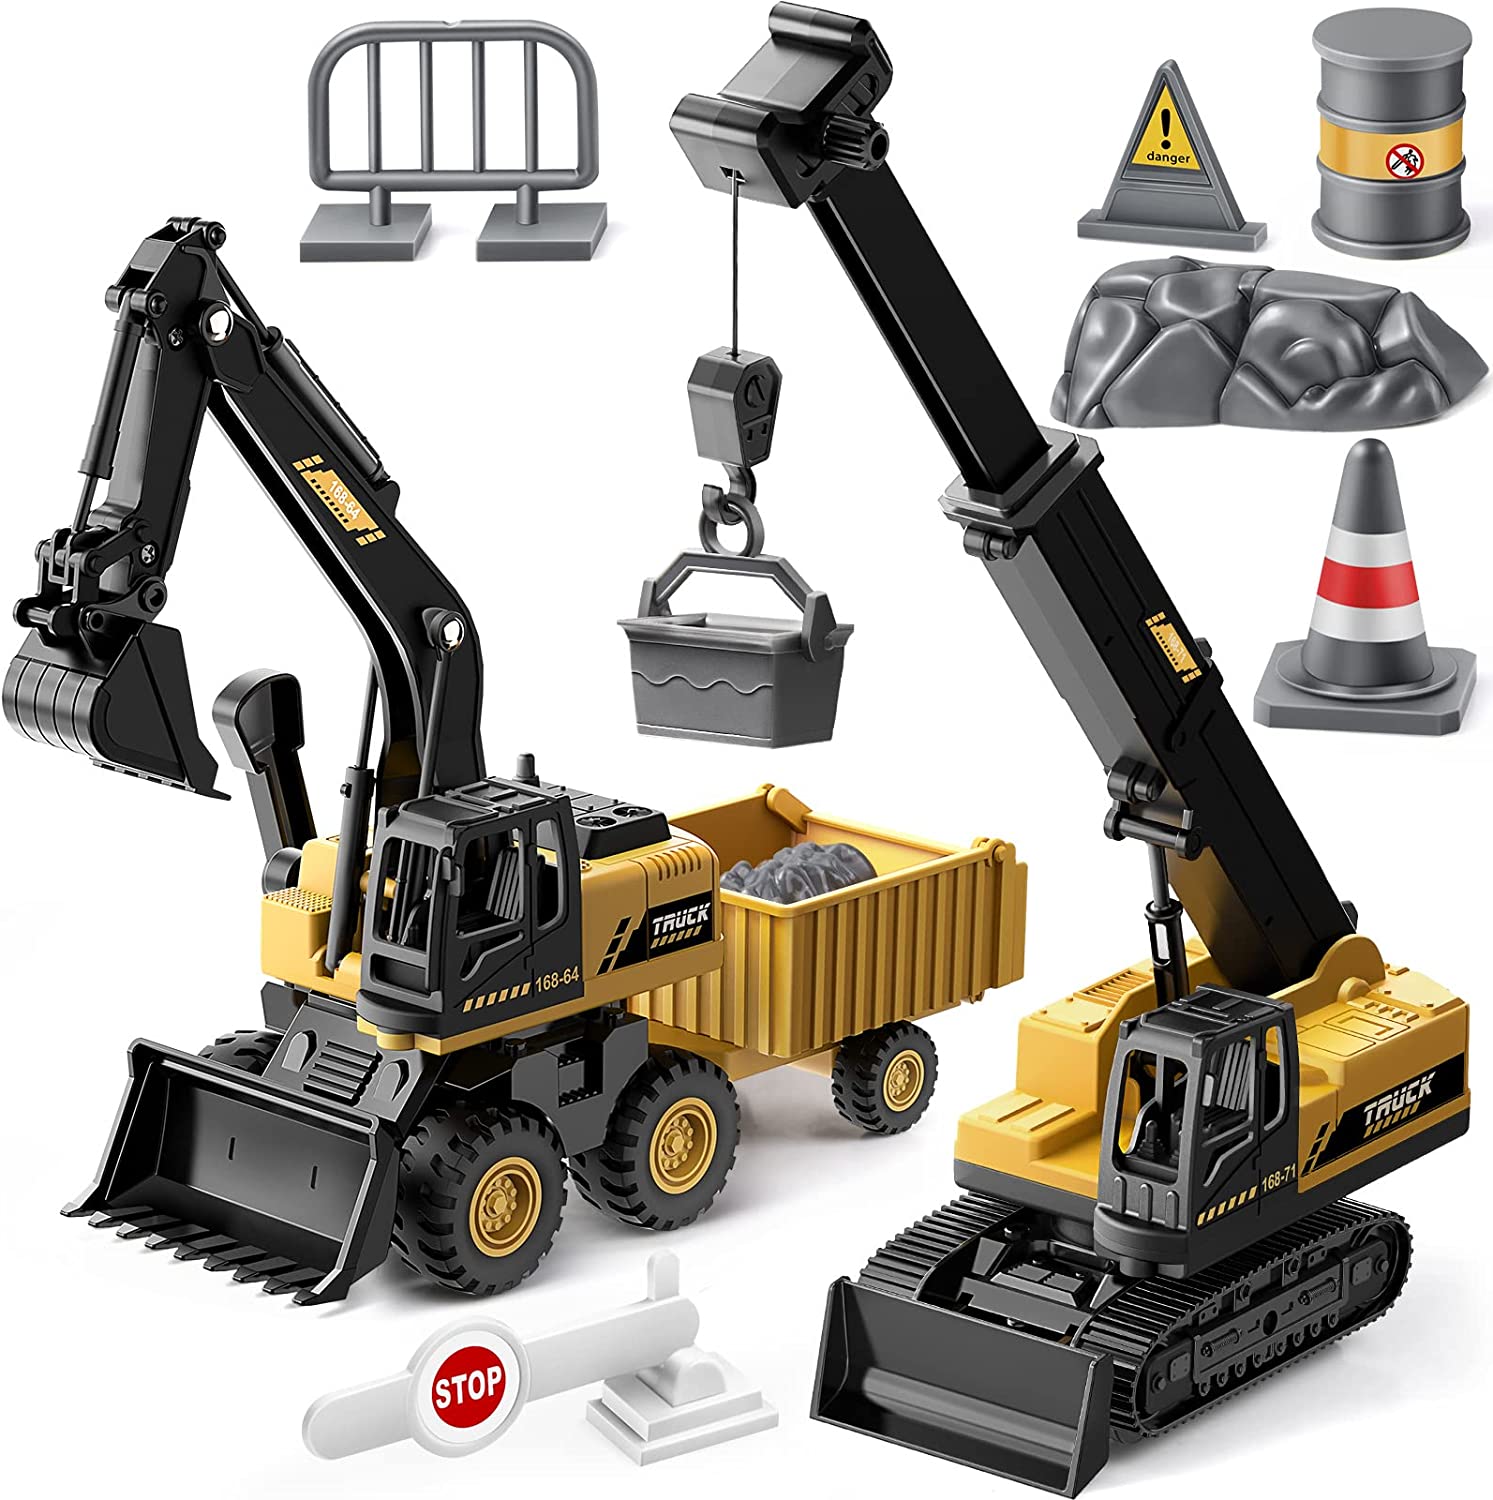 Geyiie Construction Vehicle Playset with Excavator and Crane for